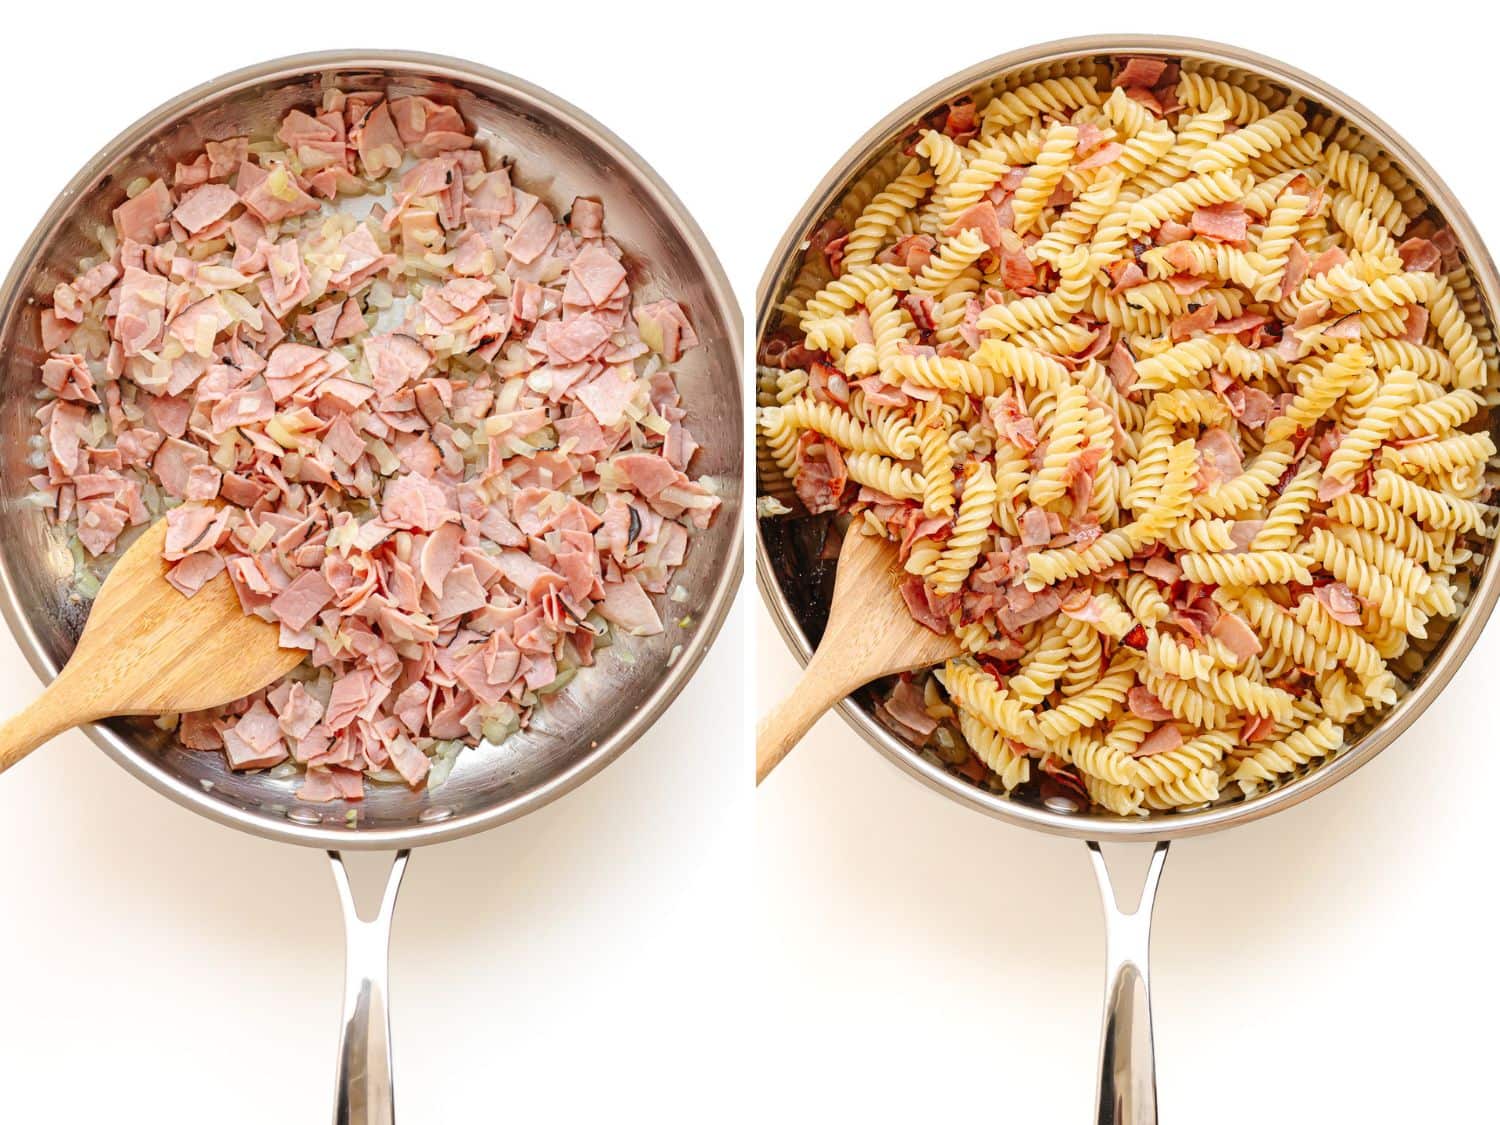 Side by side photos of a stainless steel skillet - first shows ham and onion being pan fried and second shows pasta added in as well.